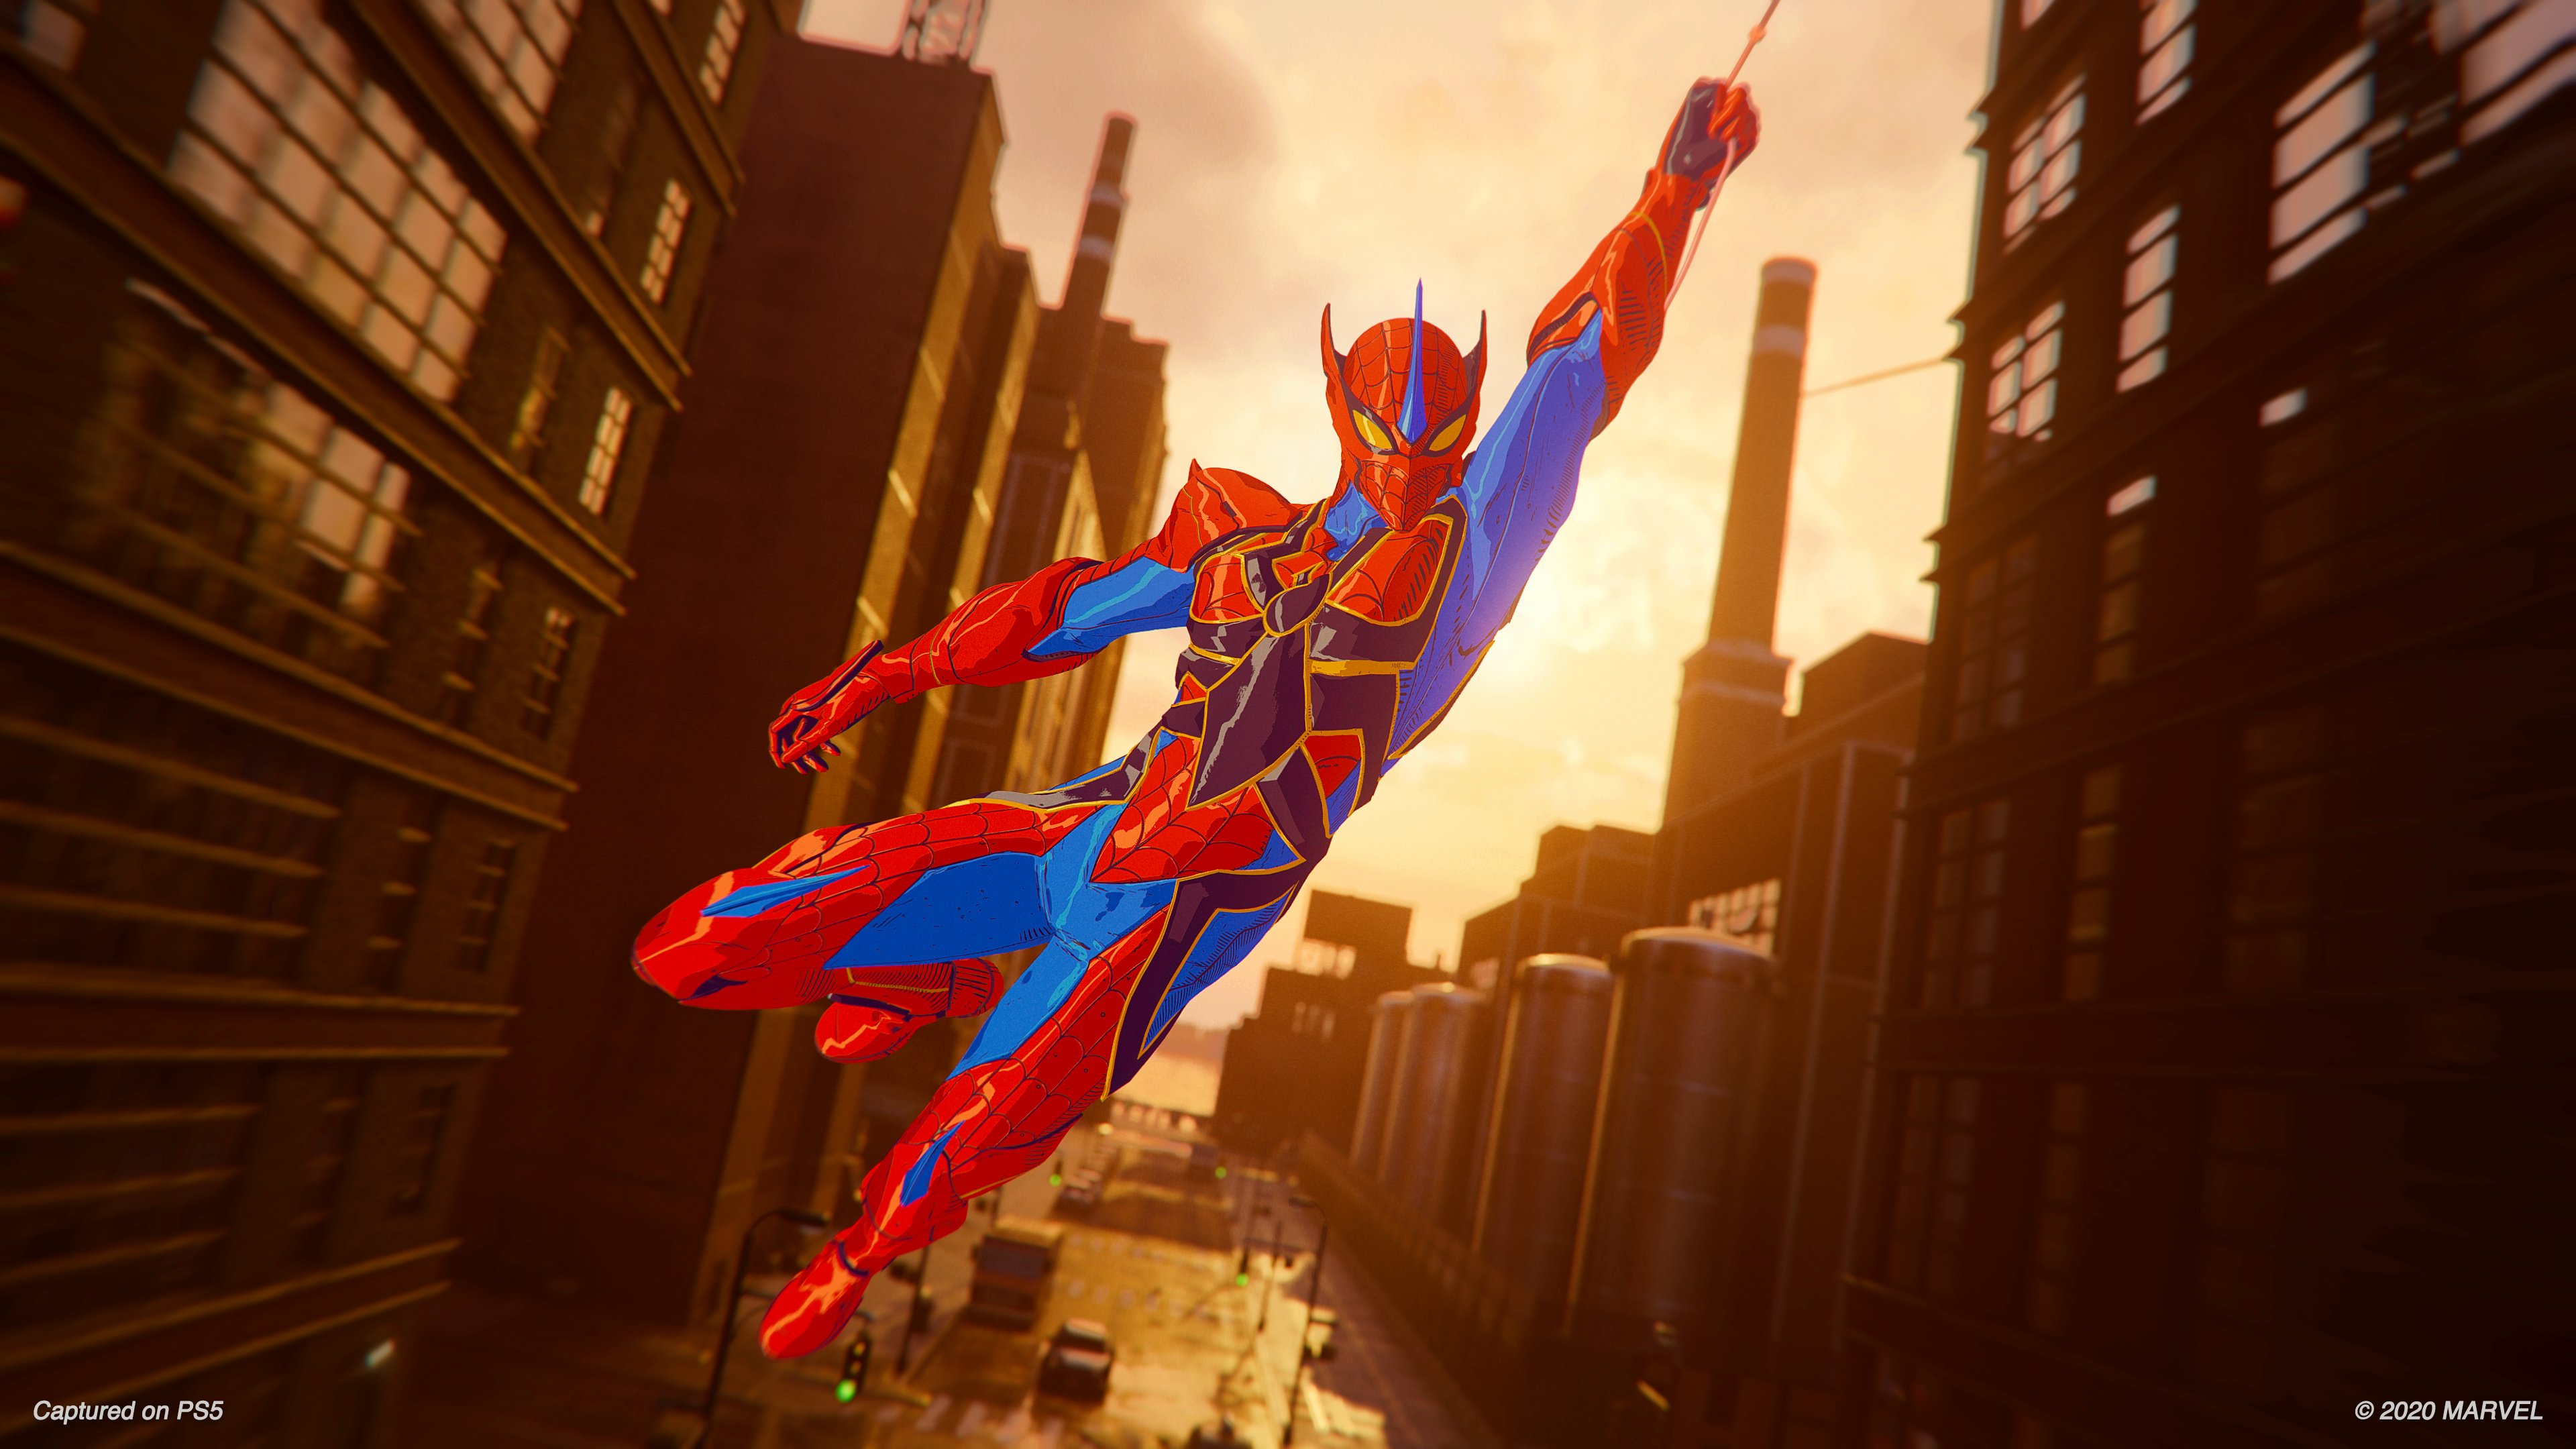 Insomniac Games on Twitter: "We have heard you - in an upcoming update for # SpiderManPS4, we add the ability to export your save to Marvel's Spider -Man Remastered. This update will also